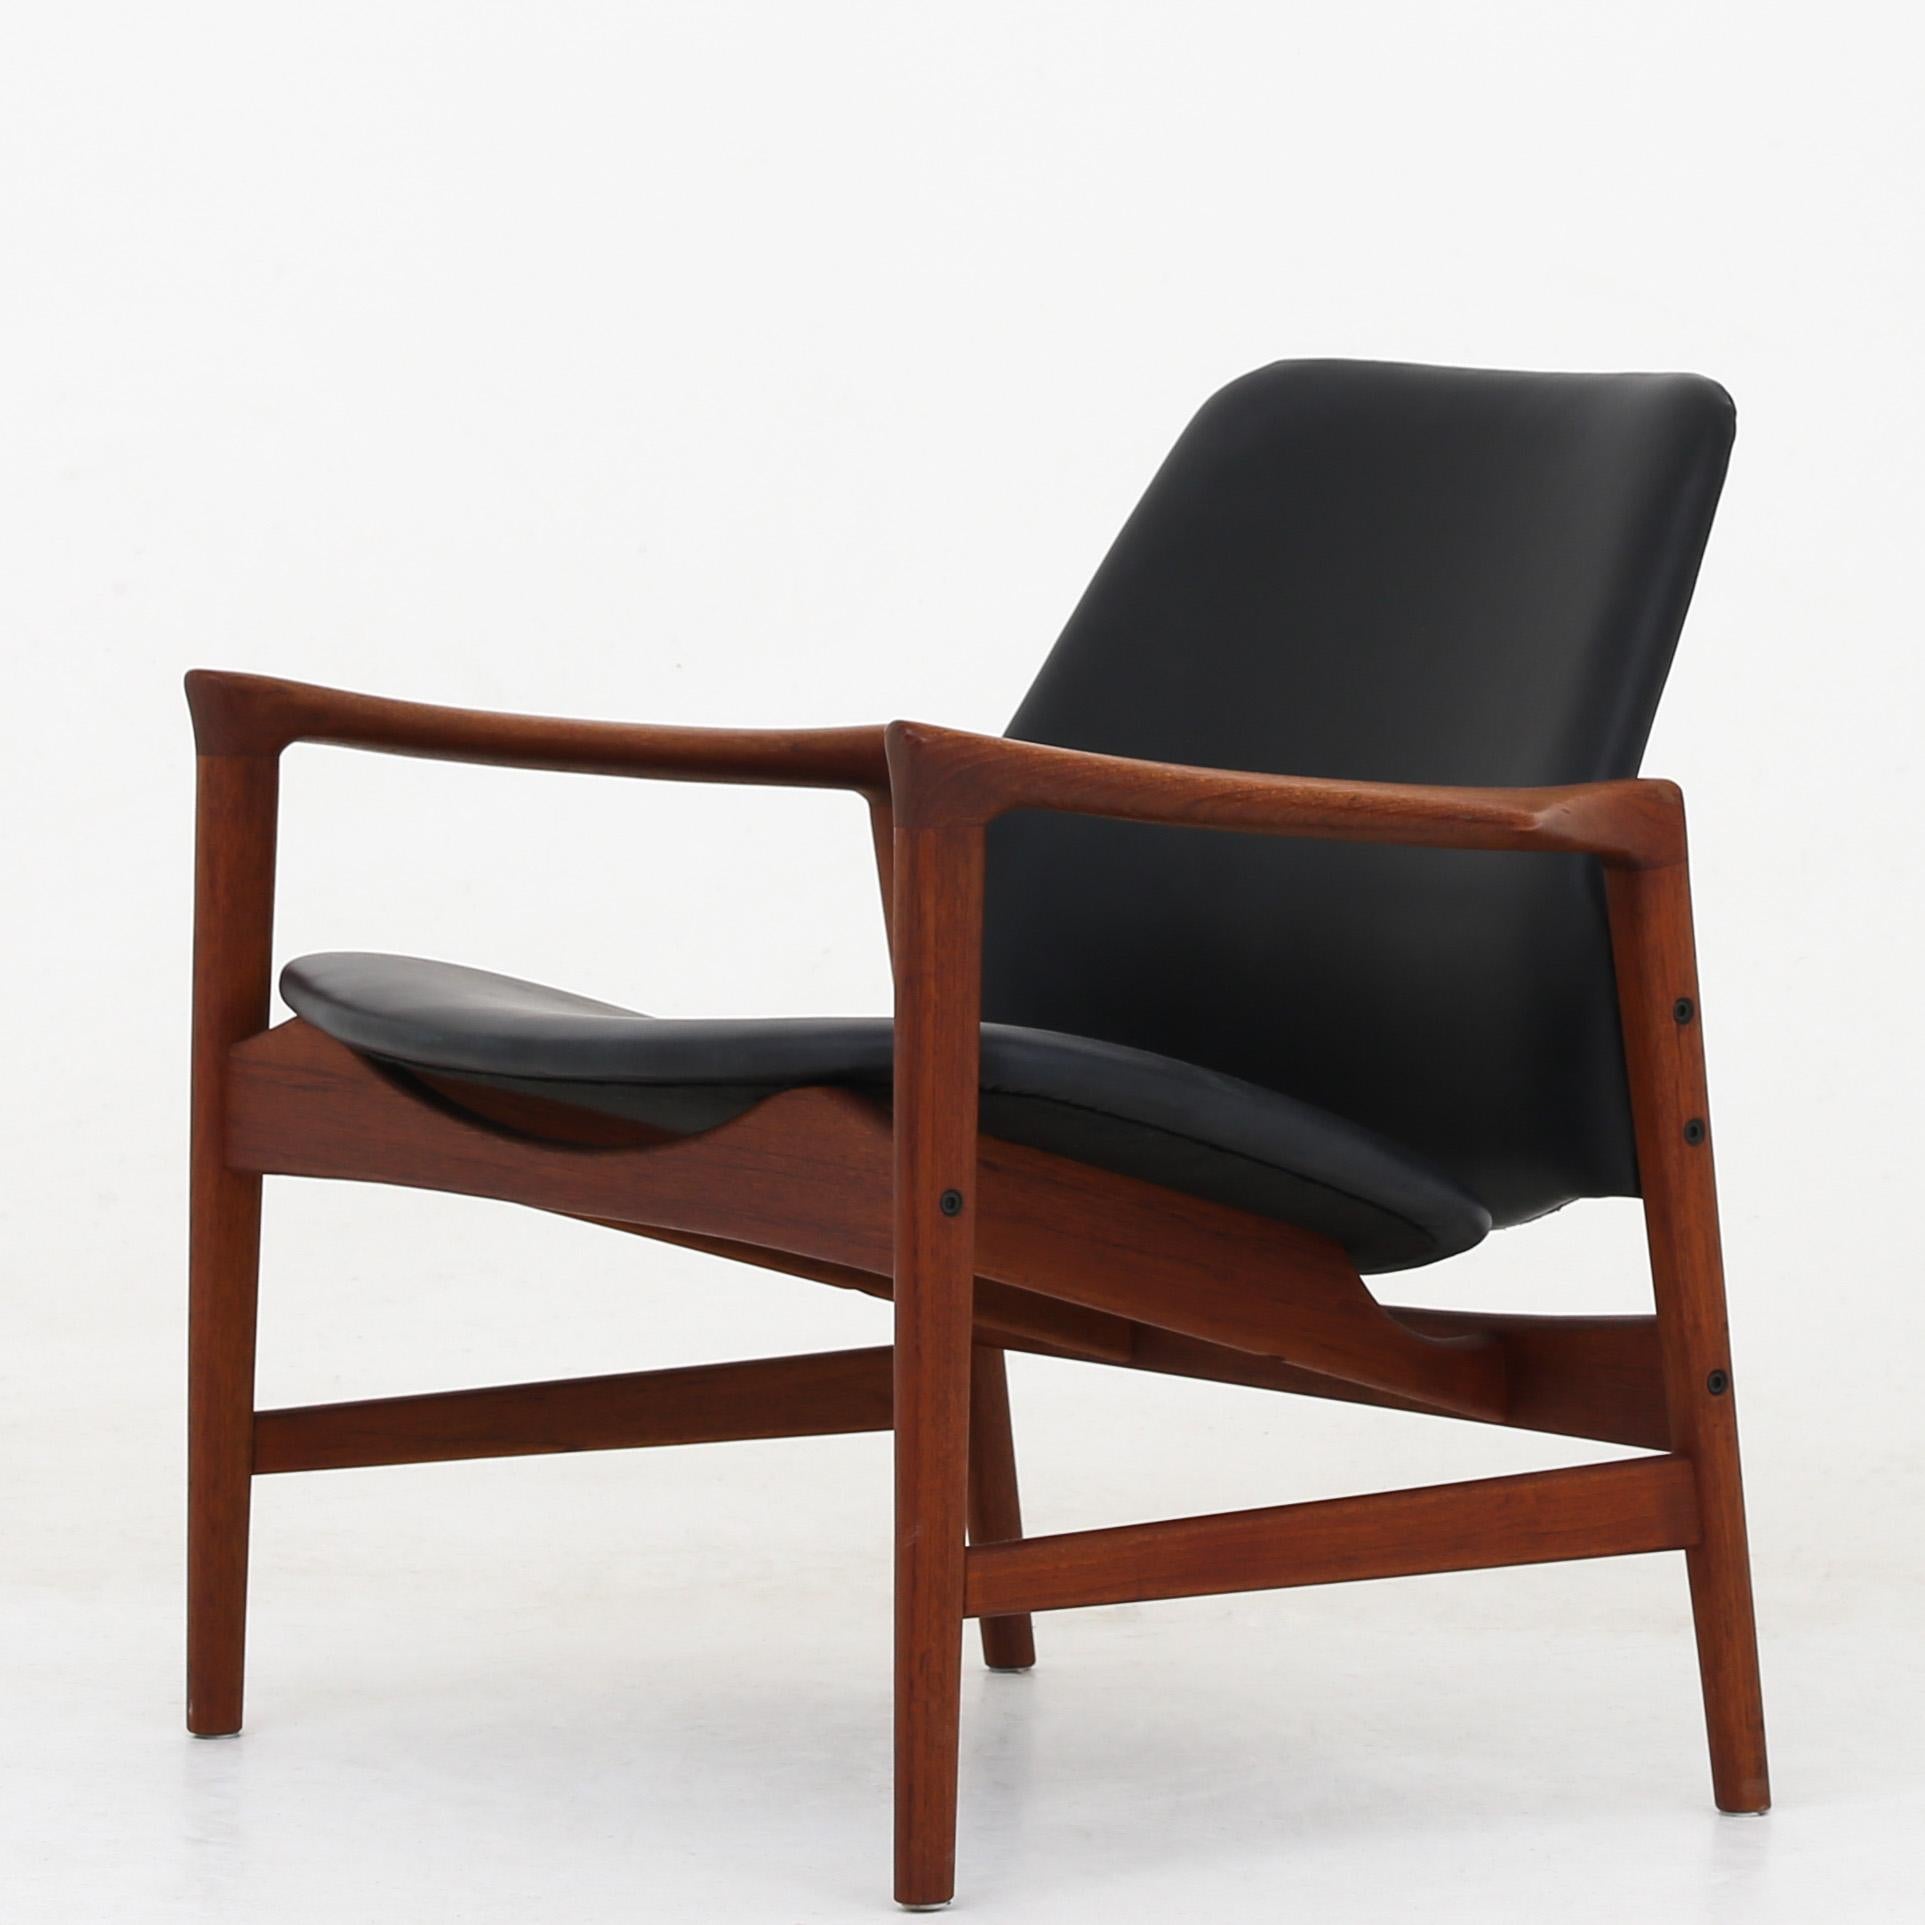 Ib Kofod Larsen set of two easy chair in teak with black leather. Model 'Holte'. Maker Oluf Persson OPE.